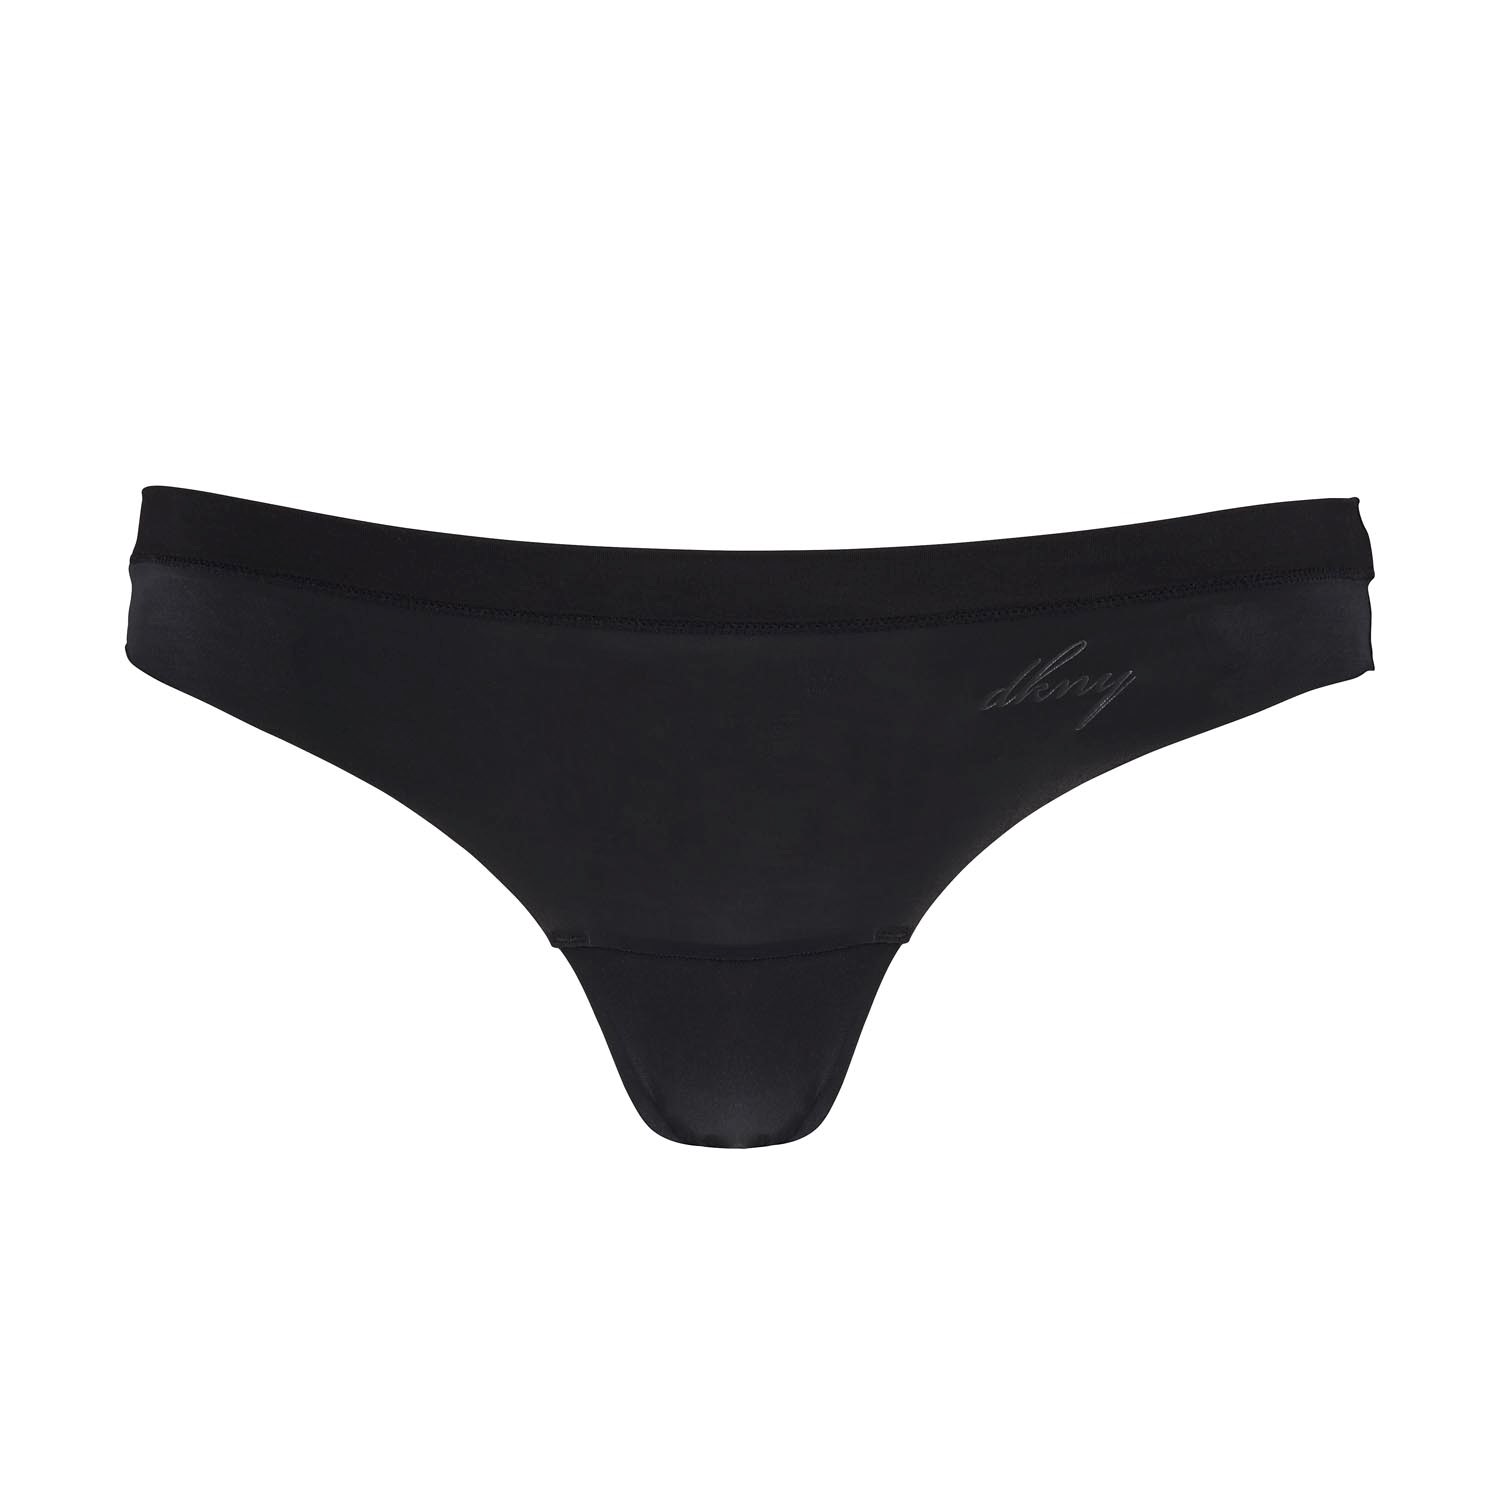 DKNY Fusion Thong - Thong - Briefs - Underwear - Timarco.co.uk